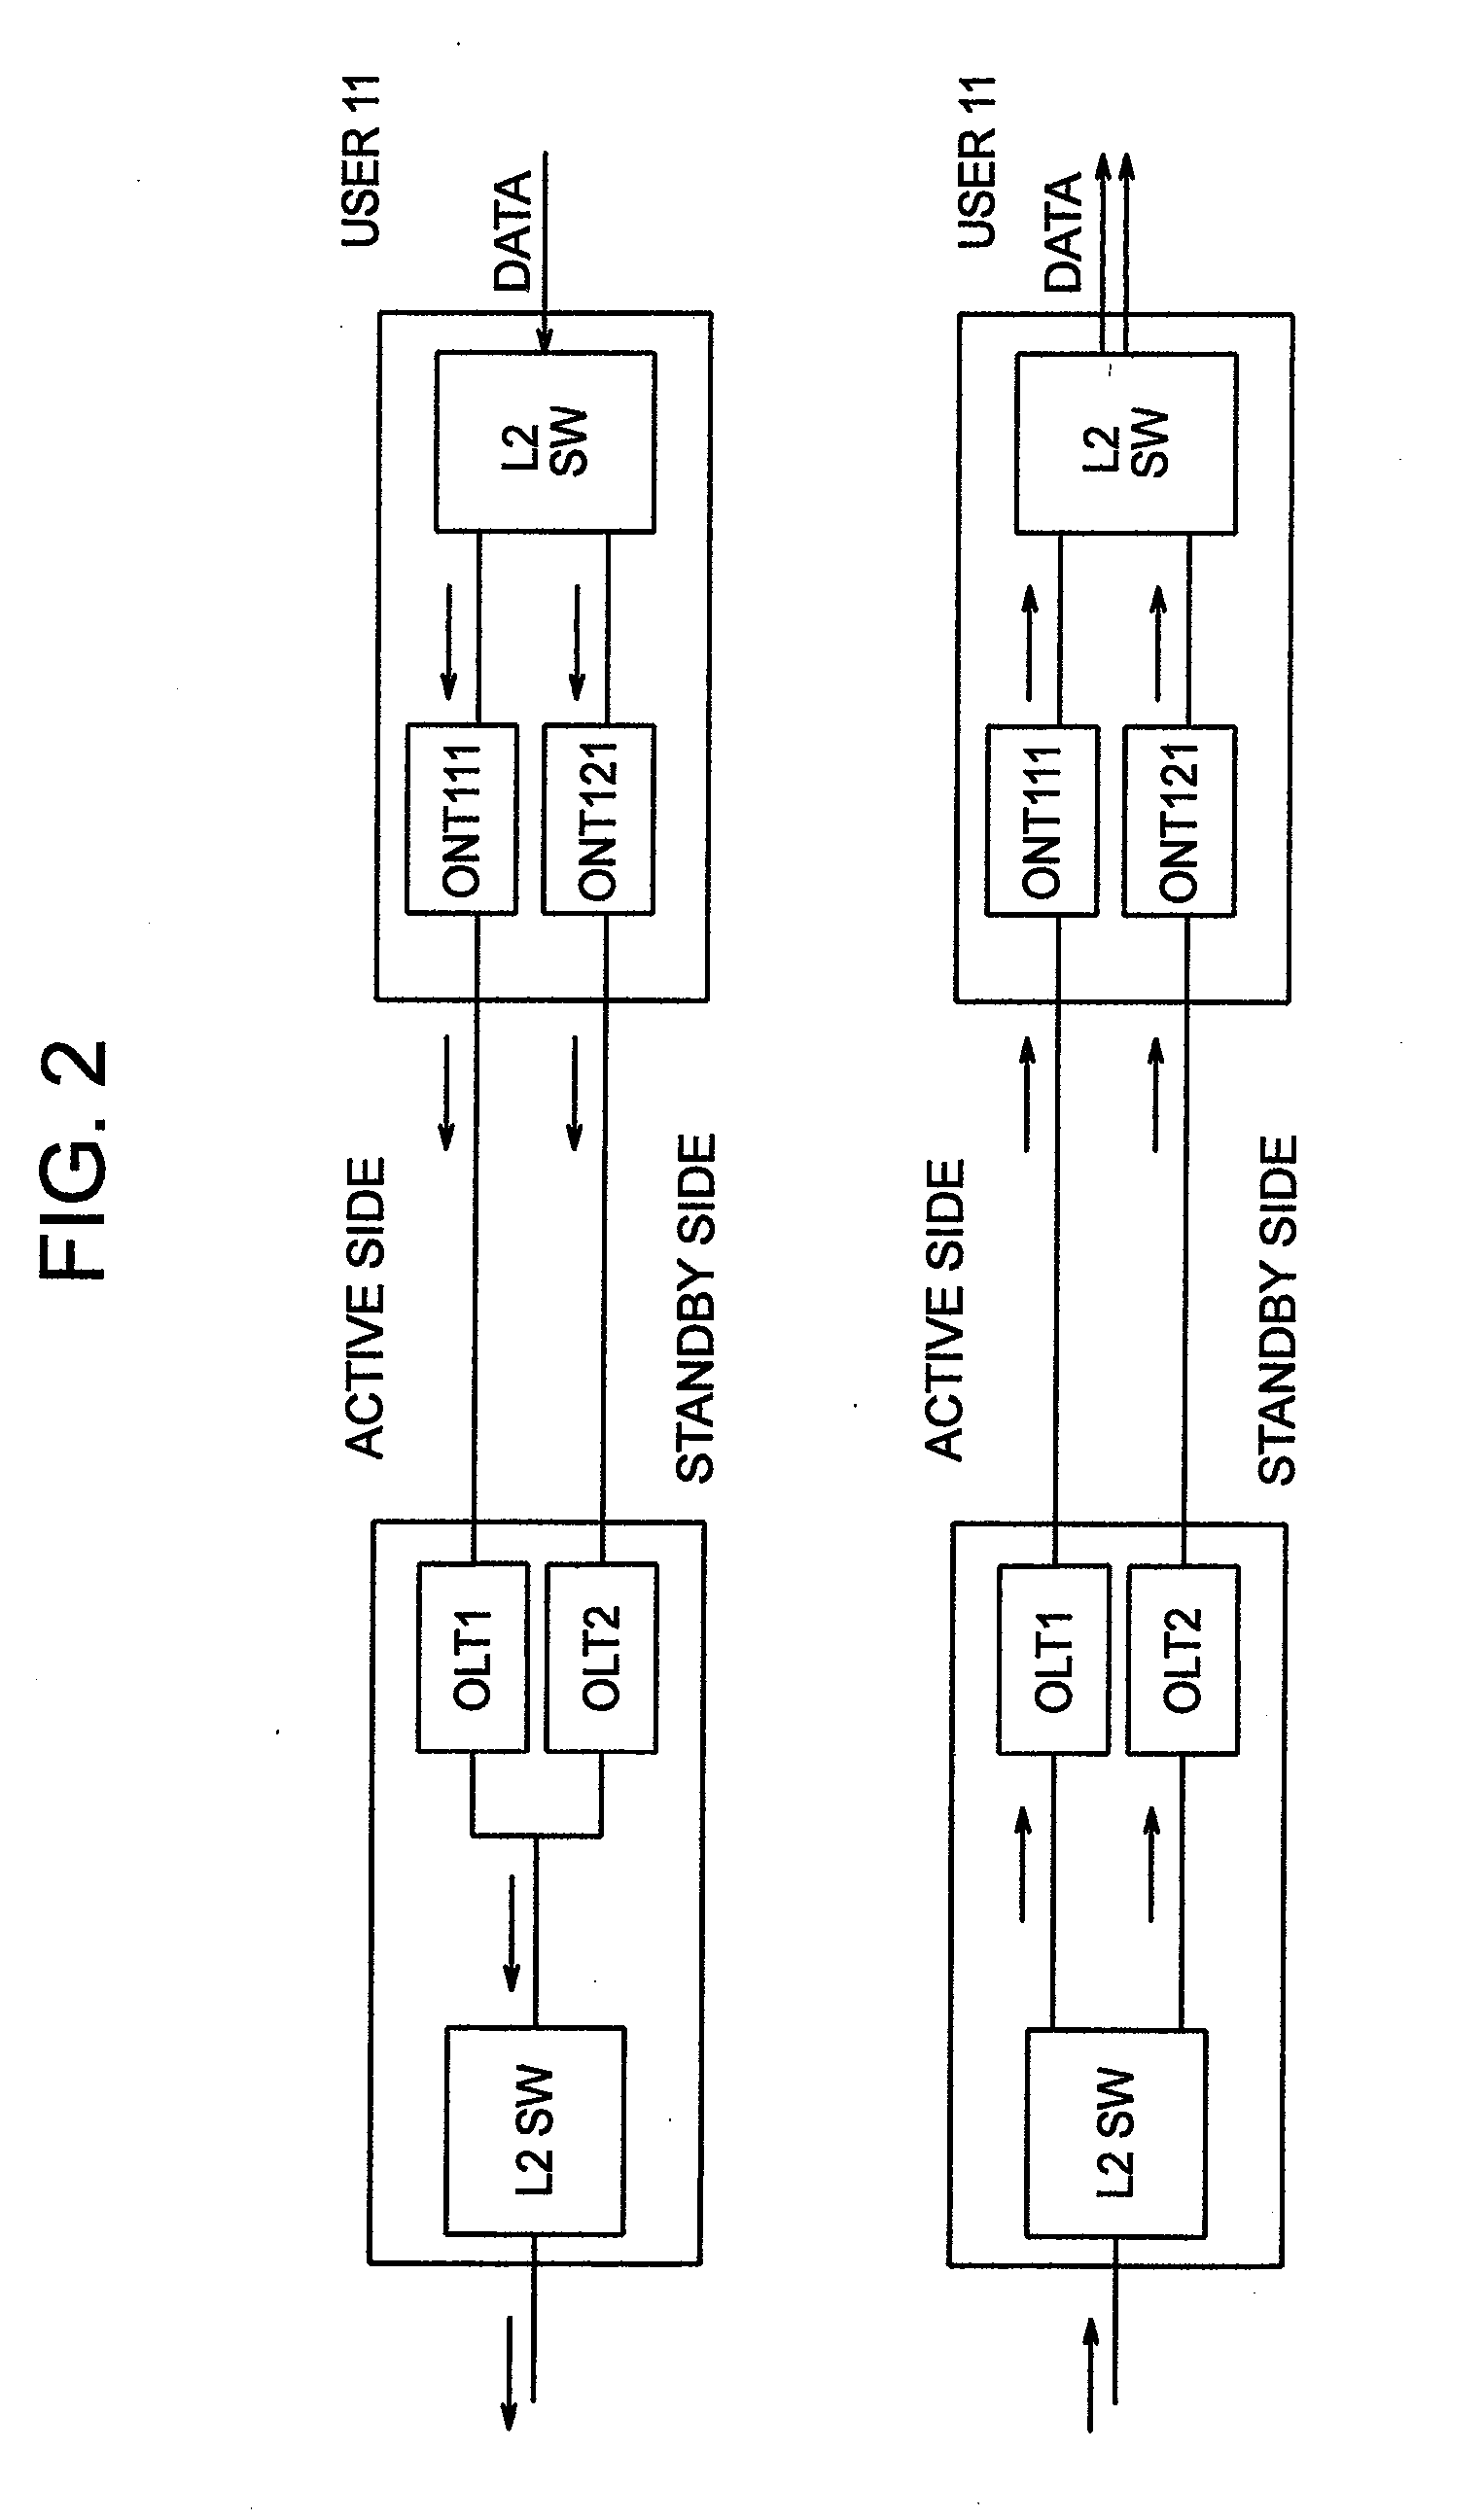 Network systems and communications equipment